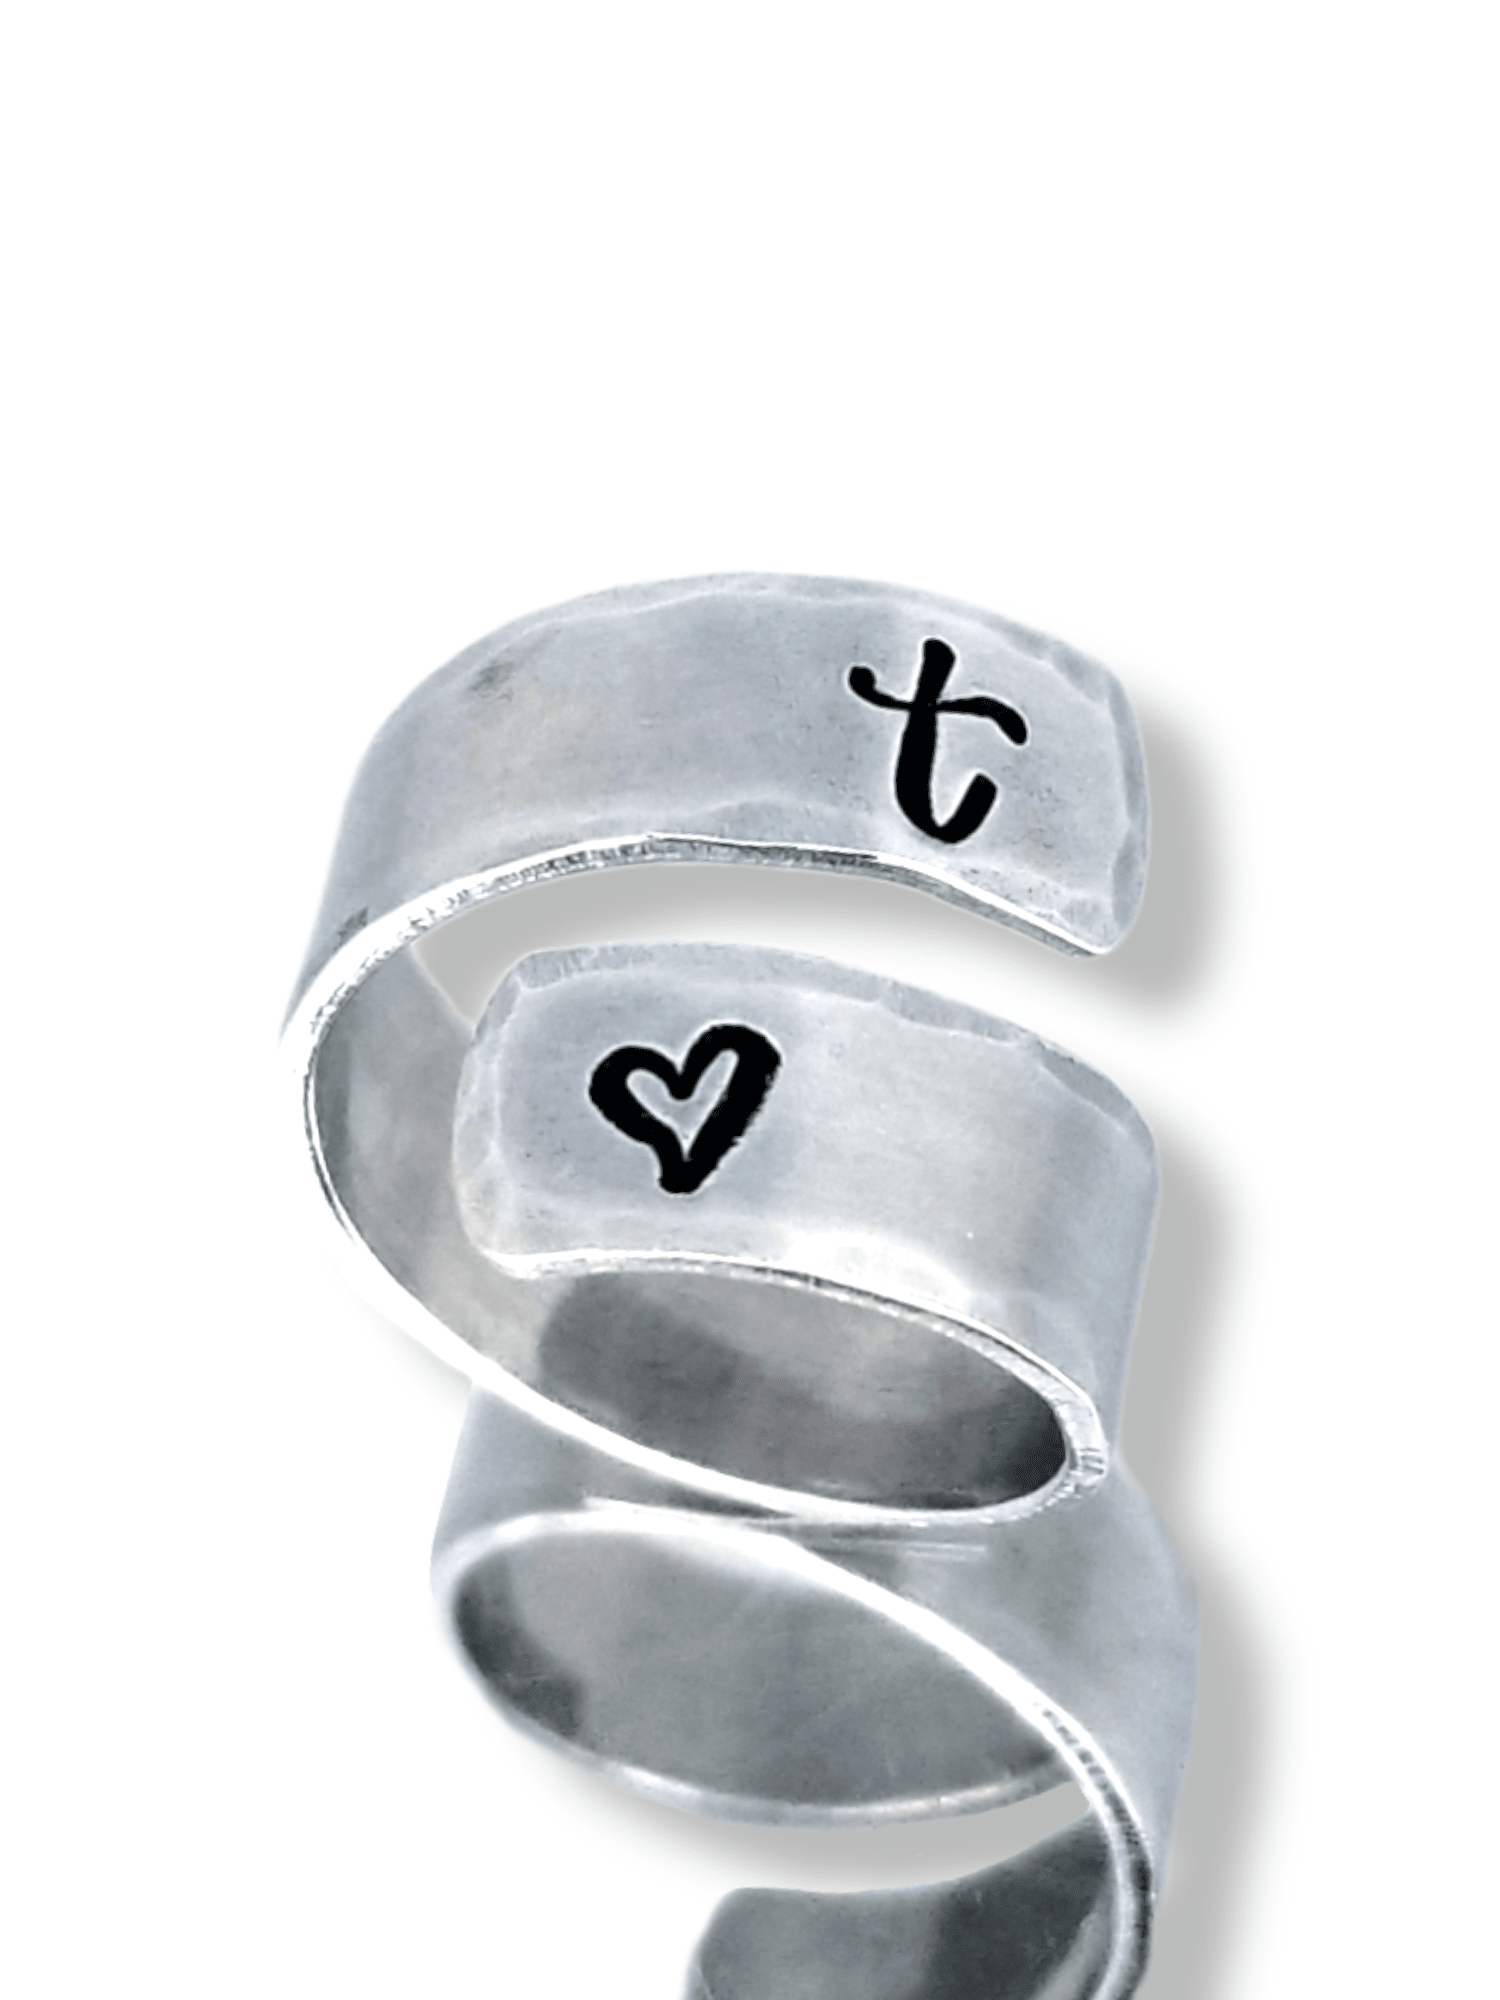 Personalized Wrap Ring, Personalize Jewelry, Hand Stamped Ring, Silver Personalize Ring, Custom rings, Valentine's gift, Girlfriend gift